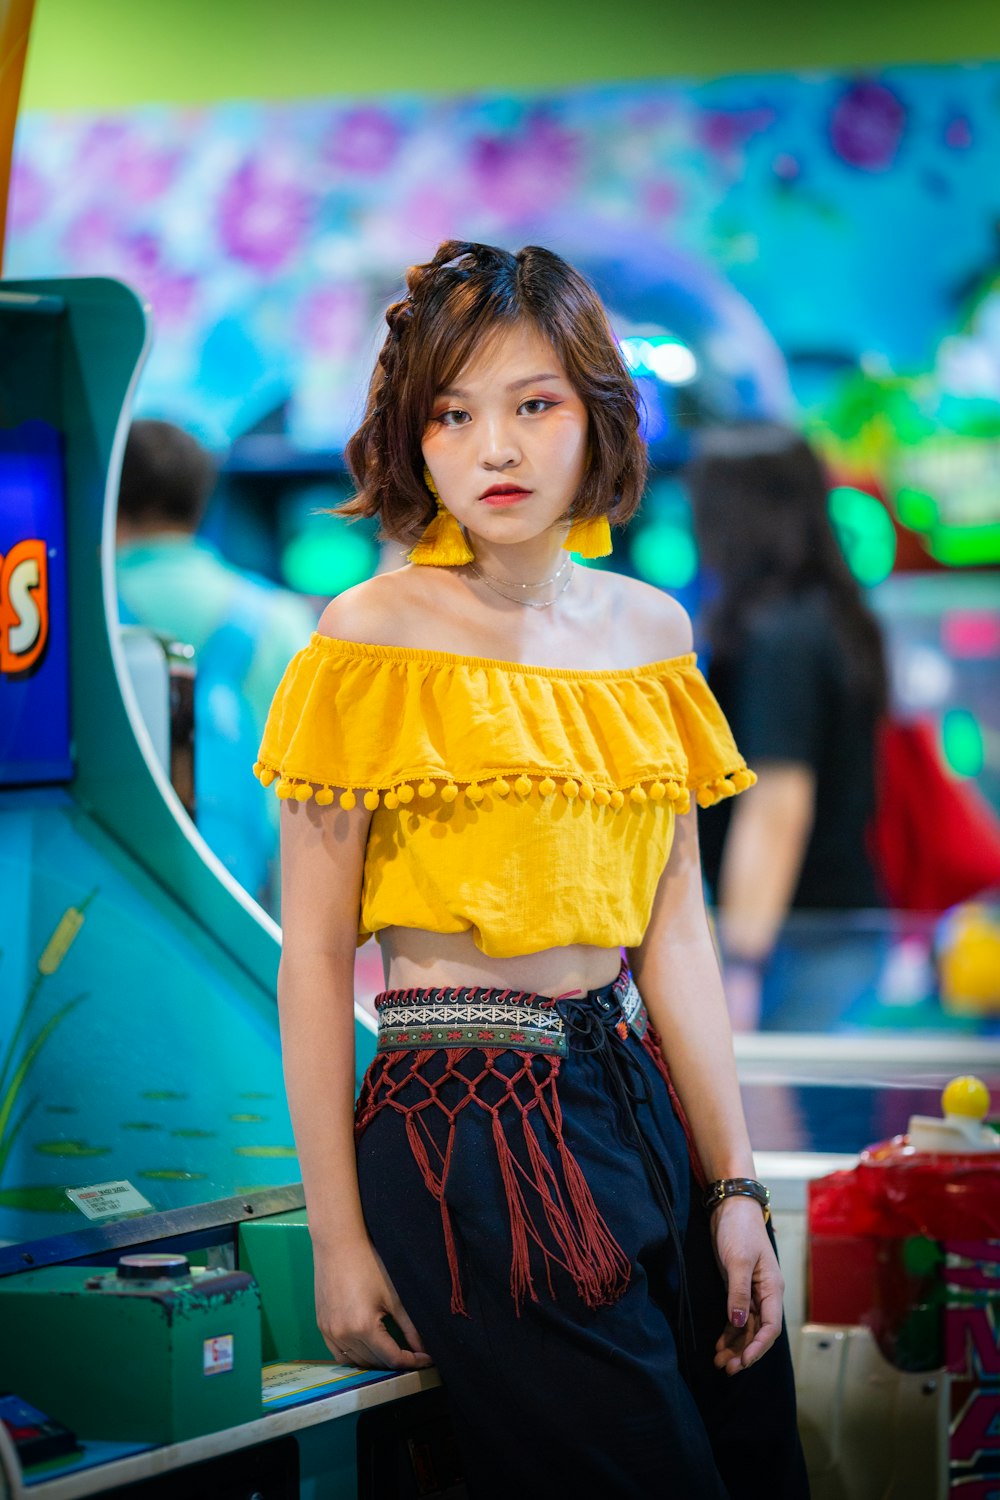 woman in yellow off-shoulder crop top sitting on green and blue arcade machine